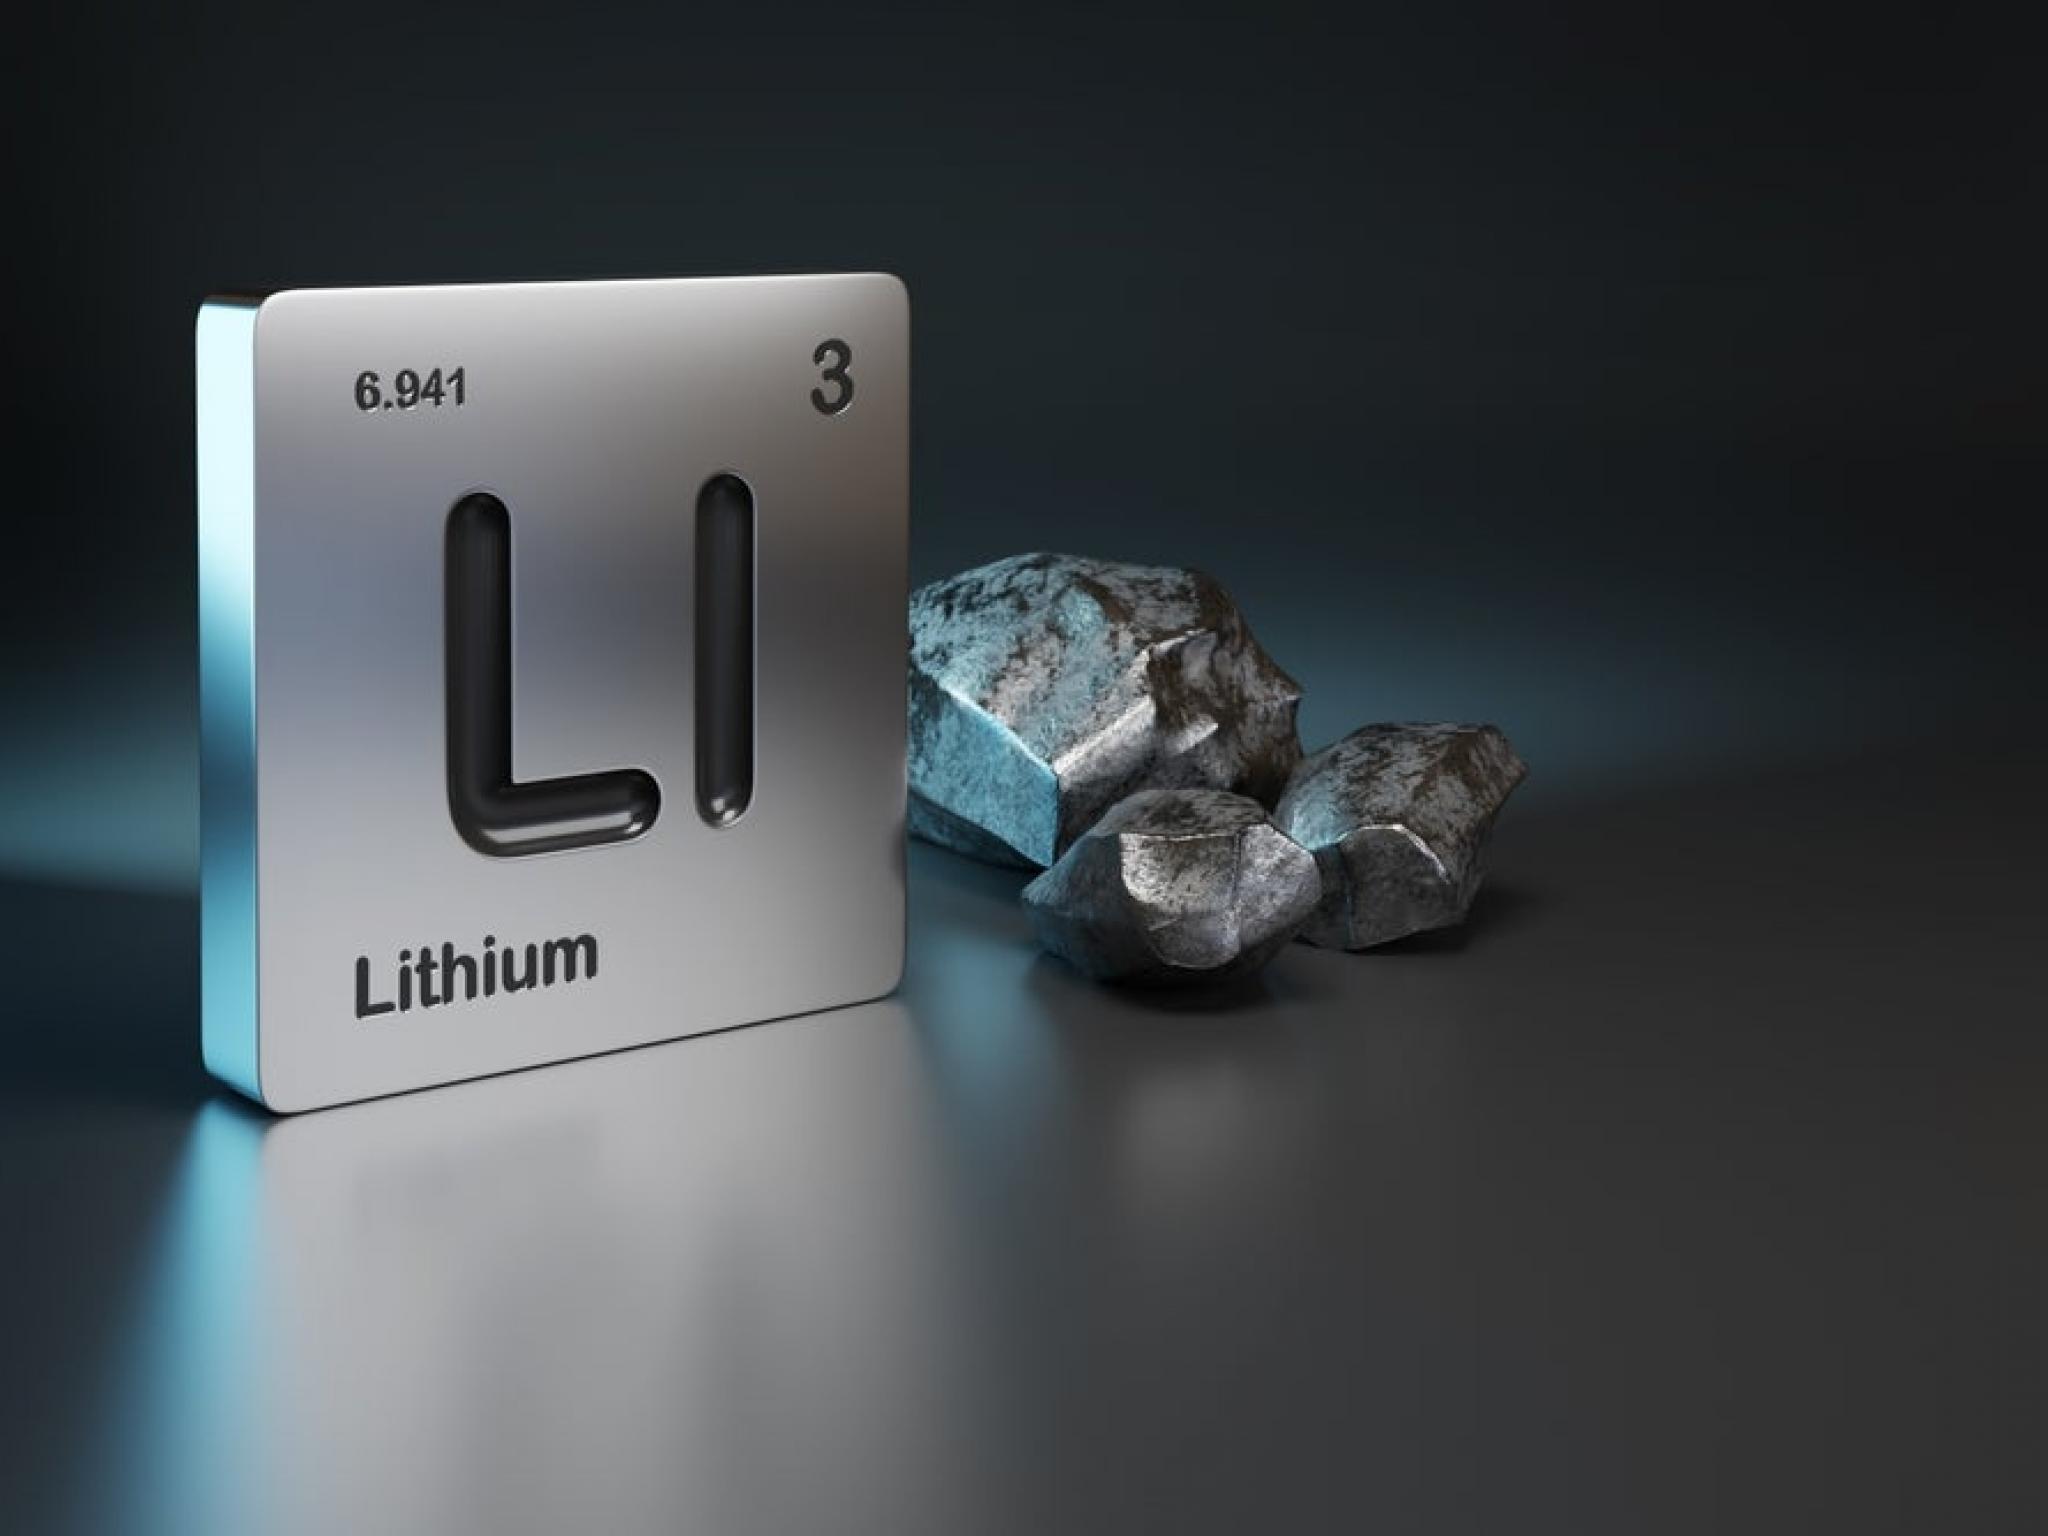  occidental-take-lithium-leap-with-berkshire-hathaways-subsidiary 